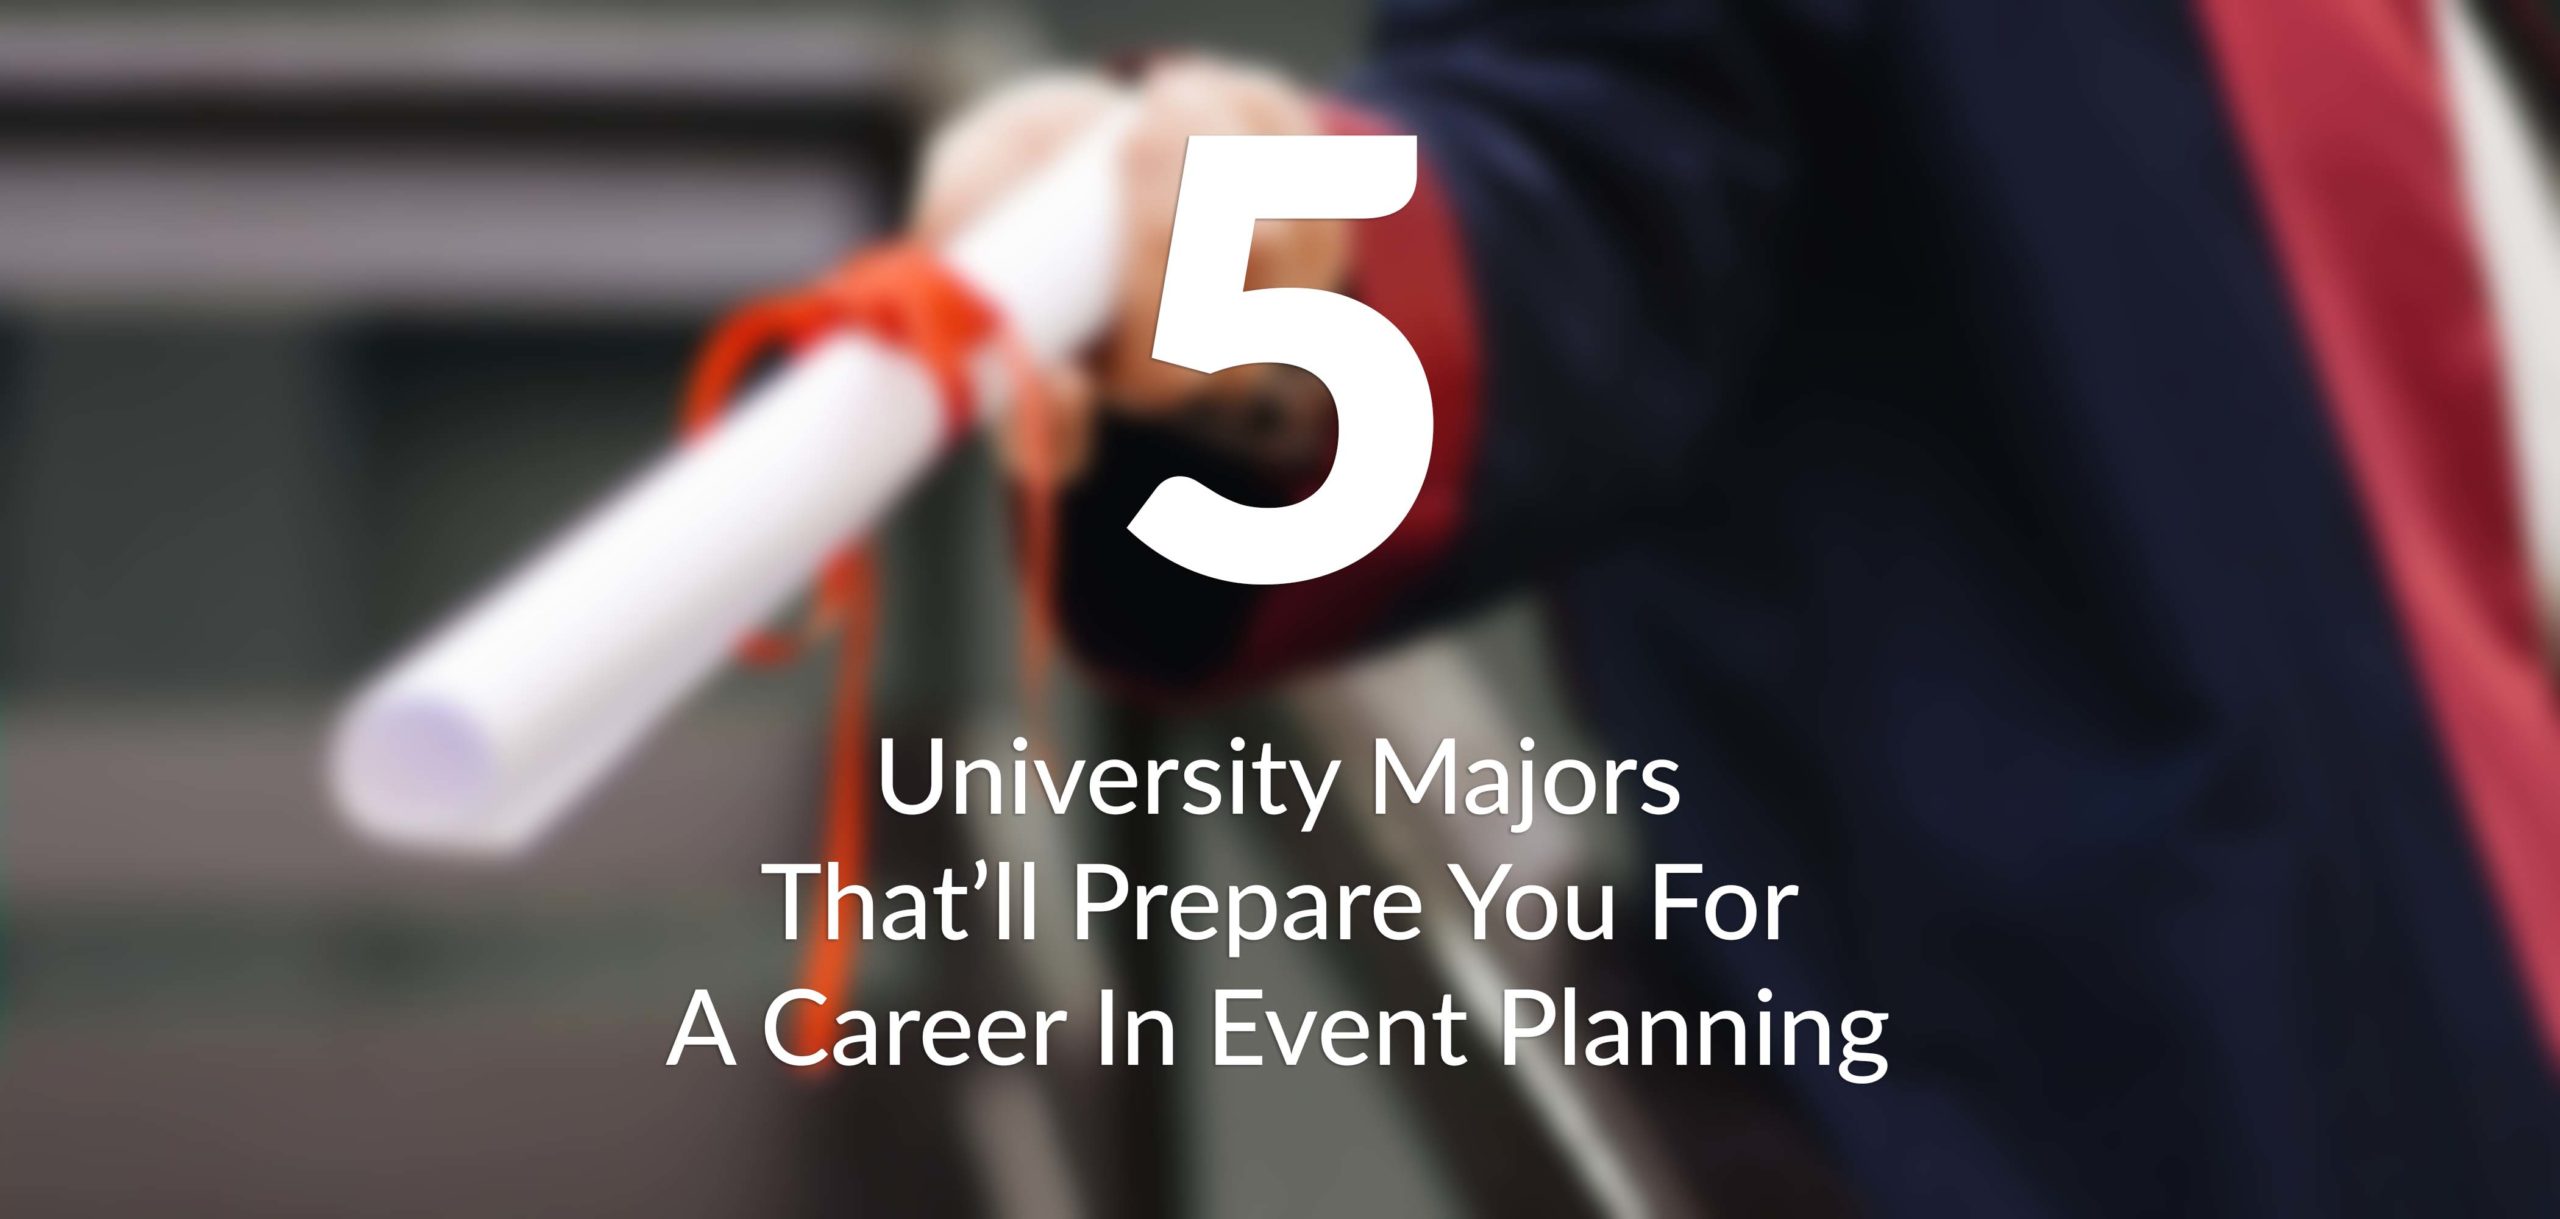 5 University Majors That'll Prepare You For A Career In Event Planning